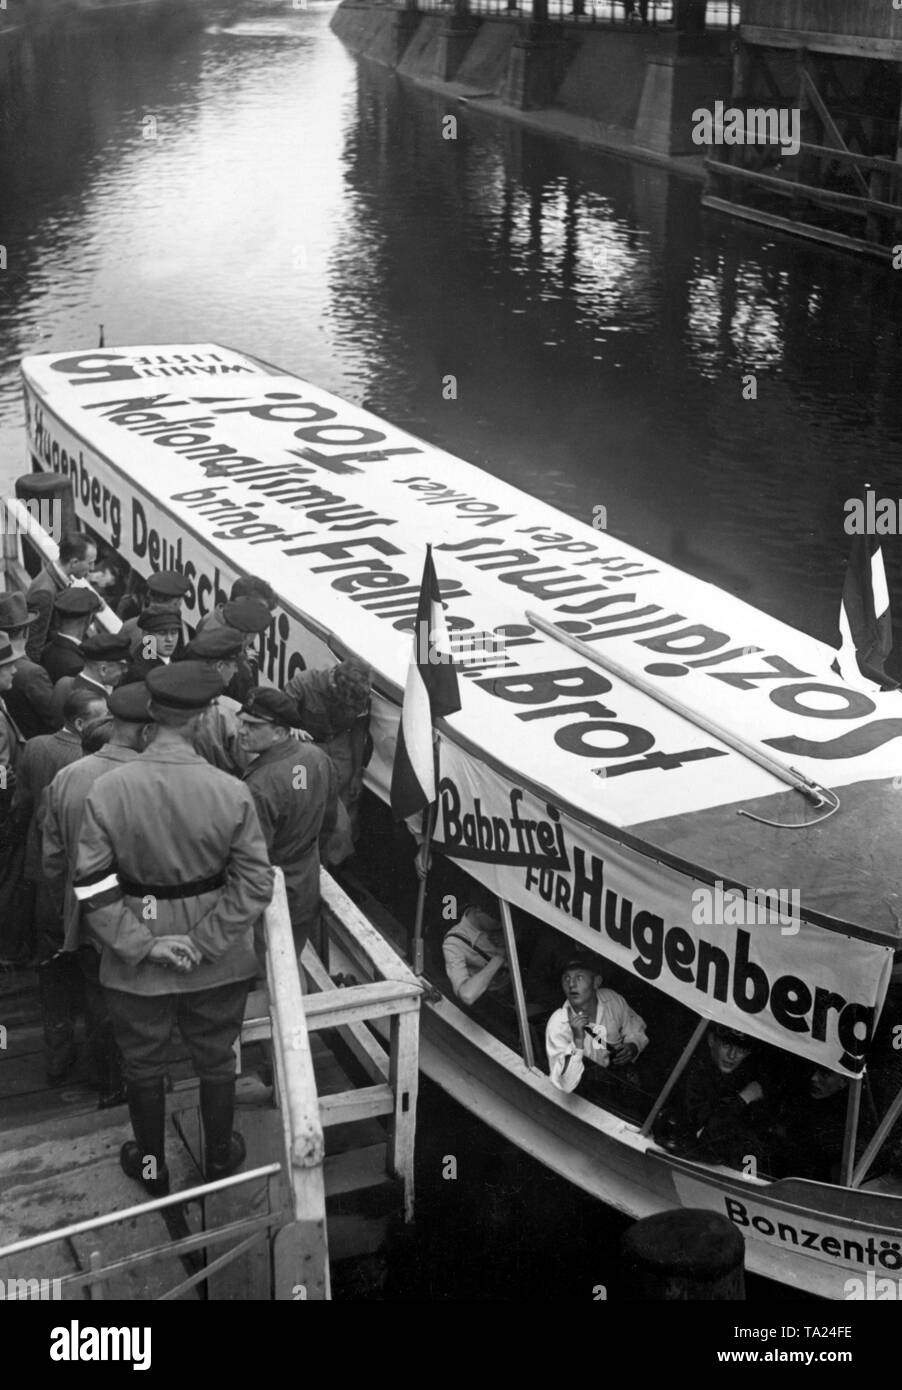 Election propaganda trip of the Bismarck Youth. Here, the boat is floating on the Landwehrkanal at Halleschen Gate in Berlin. On the roof of the ship stands 'Nationalism brings freedom & bread. Socialism is the people's death ! 'And on its sideboard: 'Hugenberg German national' and ' Freeway for Hugenberg'. Stock Photo